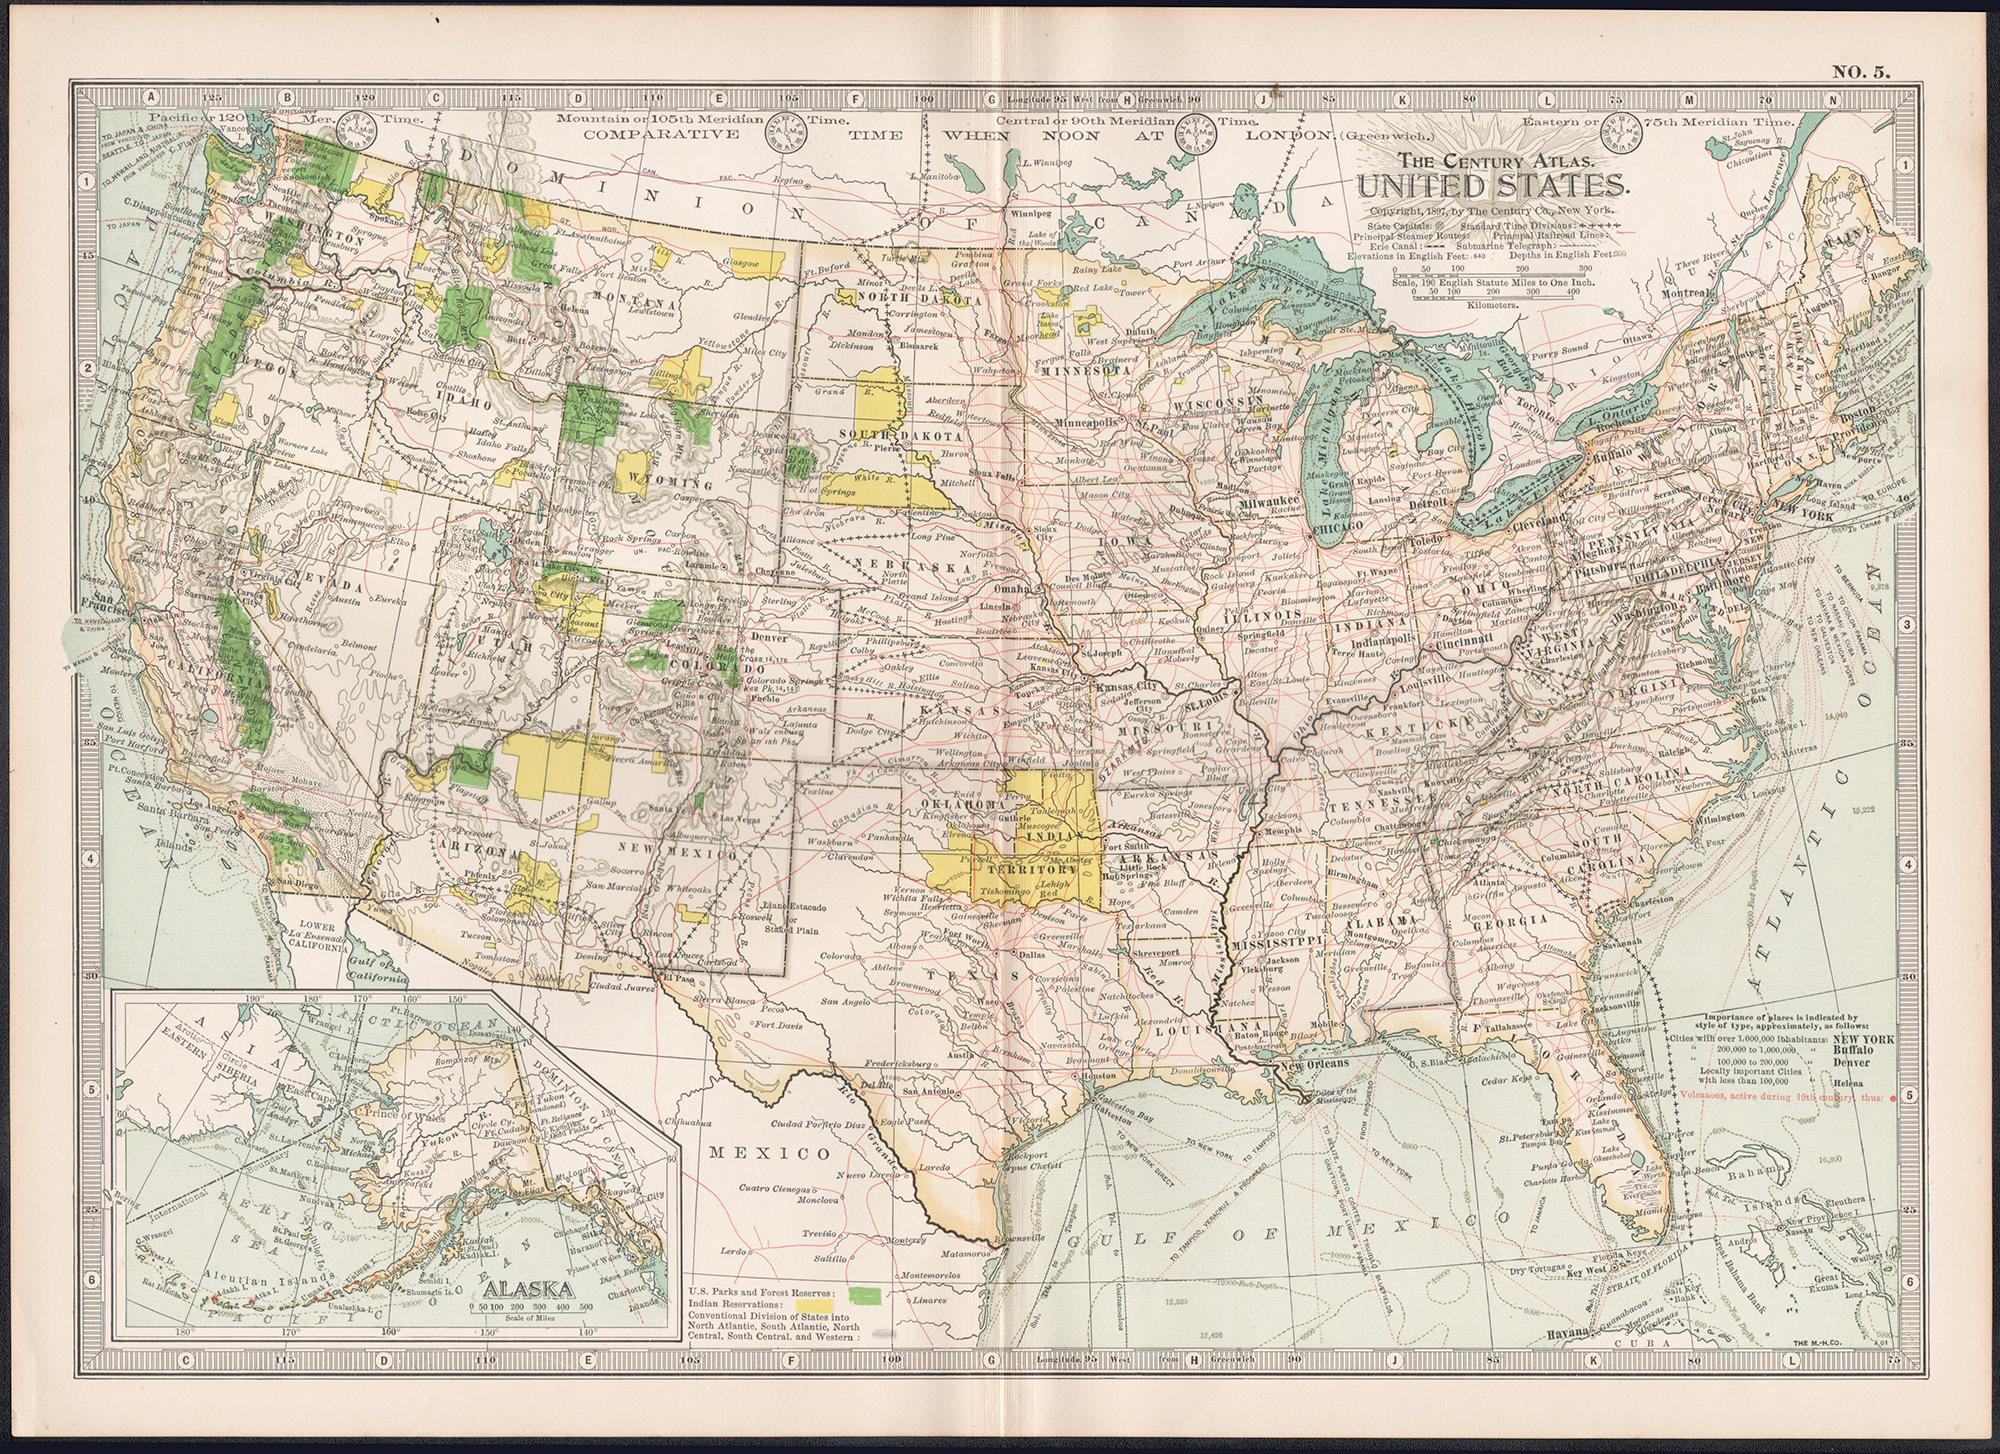 United States of America. Century Atlas antique map - Print by Unknown